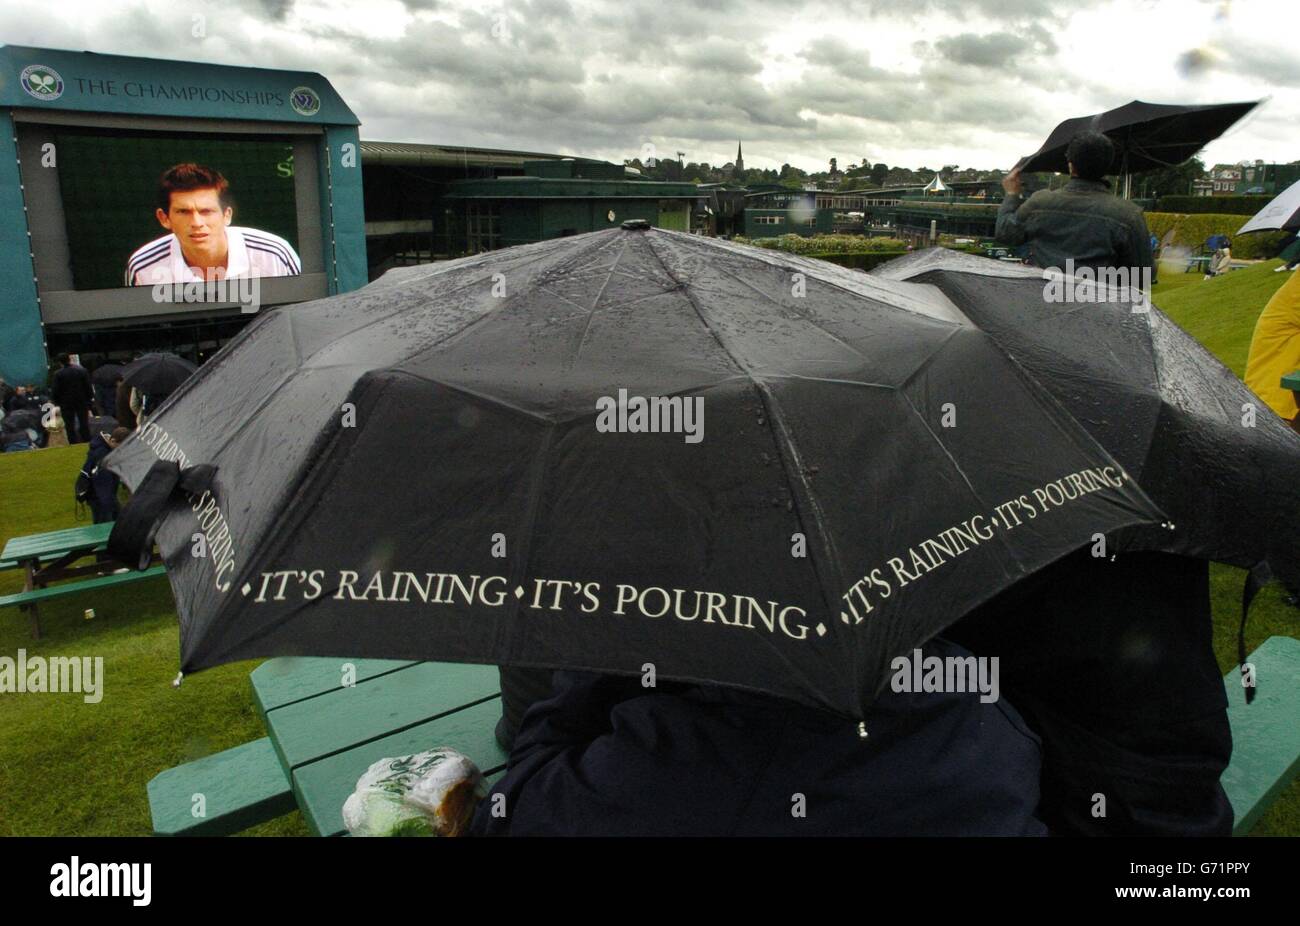 Tennis fans take cover under umbrellas as they watch repeats of matches on the big screen at The Lawn Tennis Championships in Wimbledon, London today, where rain and gales delayed the start of play. 24/06/04: Players and spectators at Wimbledon were praying for good weather in the hope that heavy rain would not destroy another day of tennis. For only the eighth time in the last 30 years the third day's play at this year's championships was a complete wash-out, as persistent downpours and strong winds hit SW19. Stock Photo